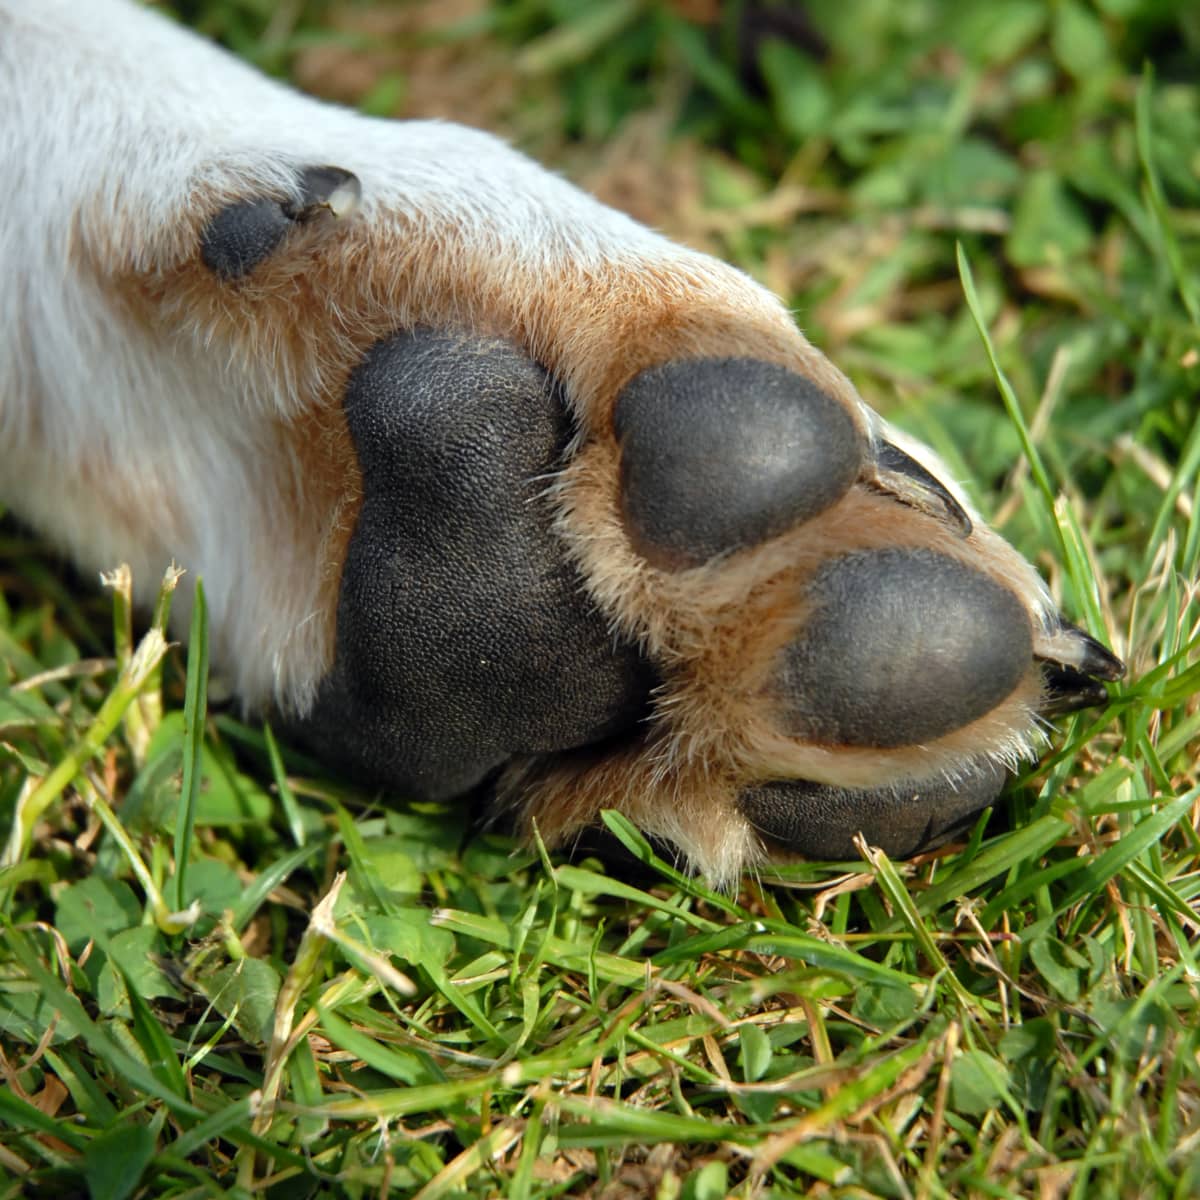 hø Årvågenhed Kriger The Different Types of Feet That Dogs Have - PetHelpful